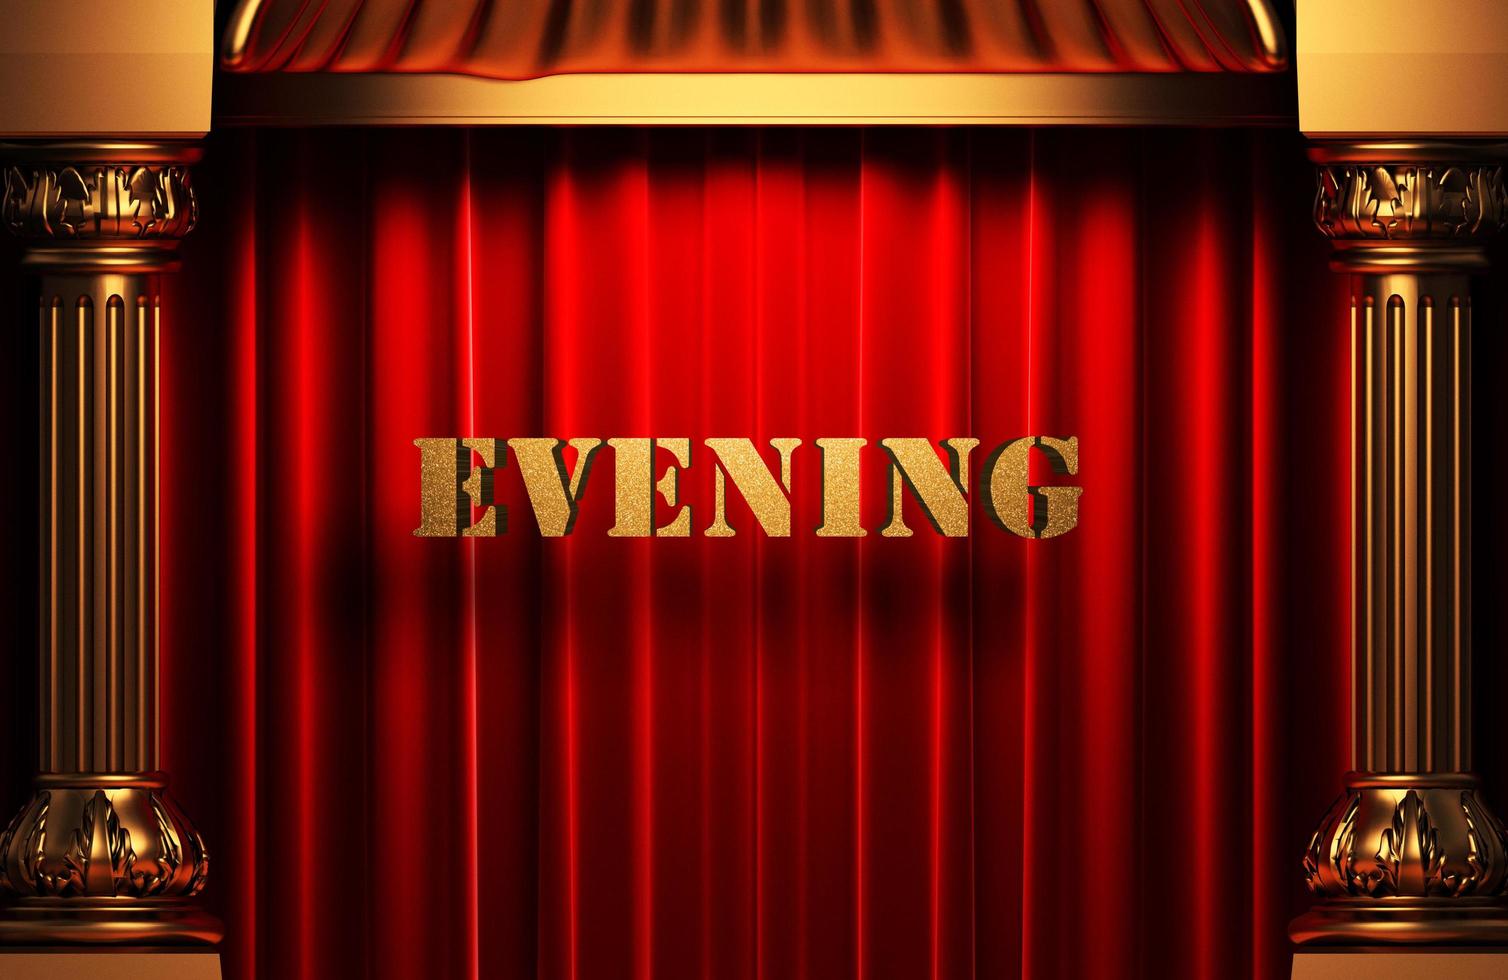 evening golden word on red curtain photo